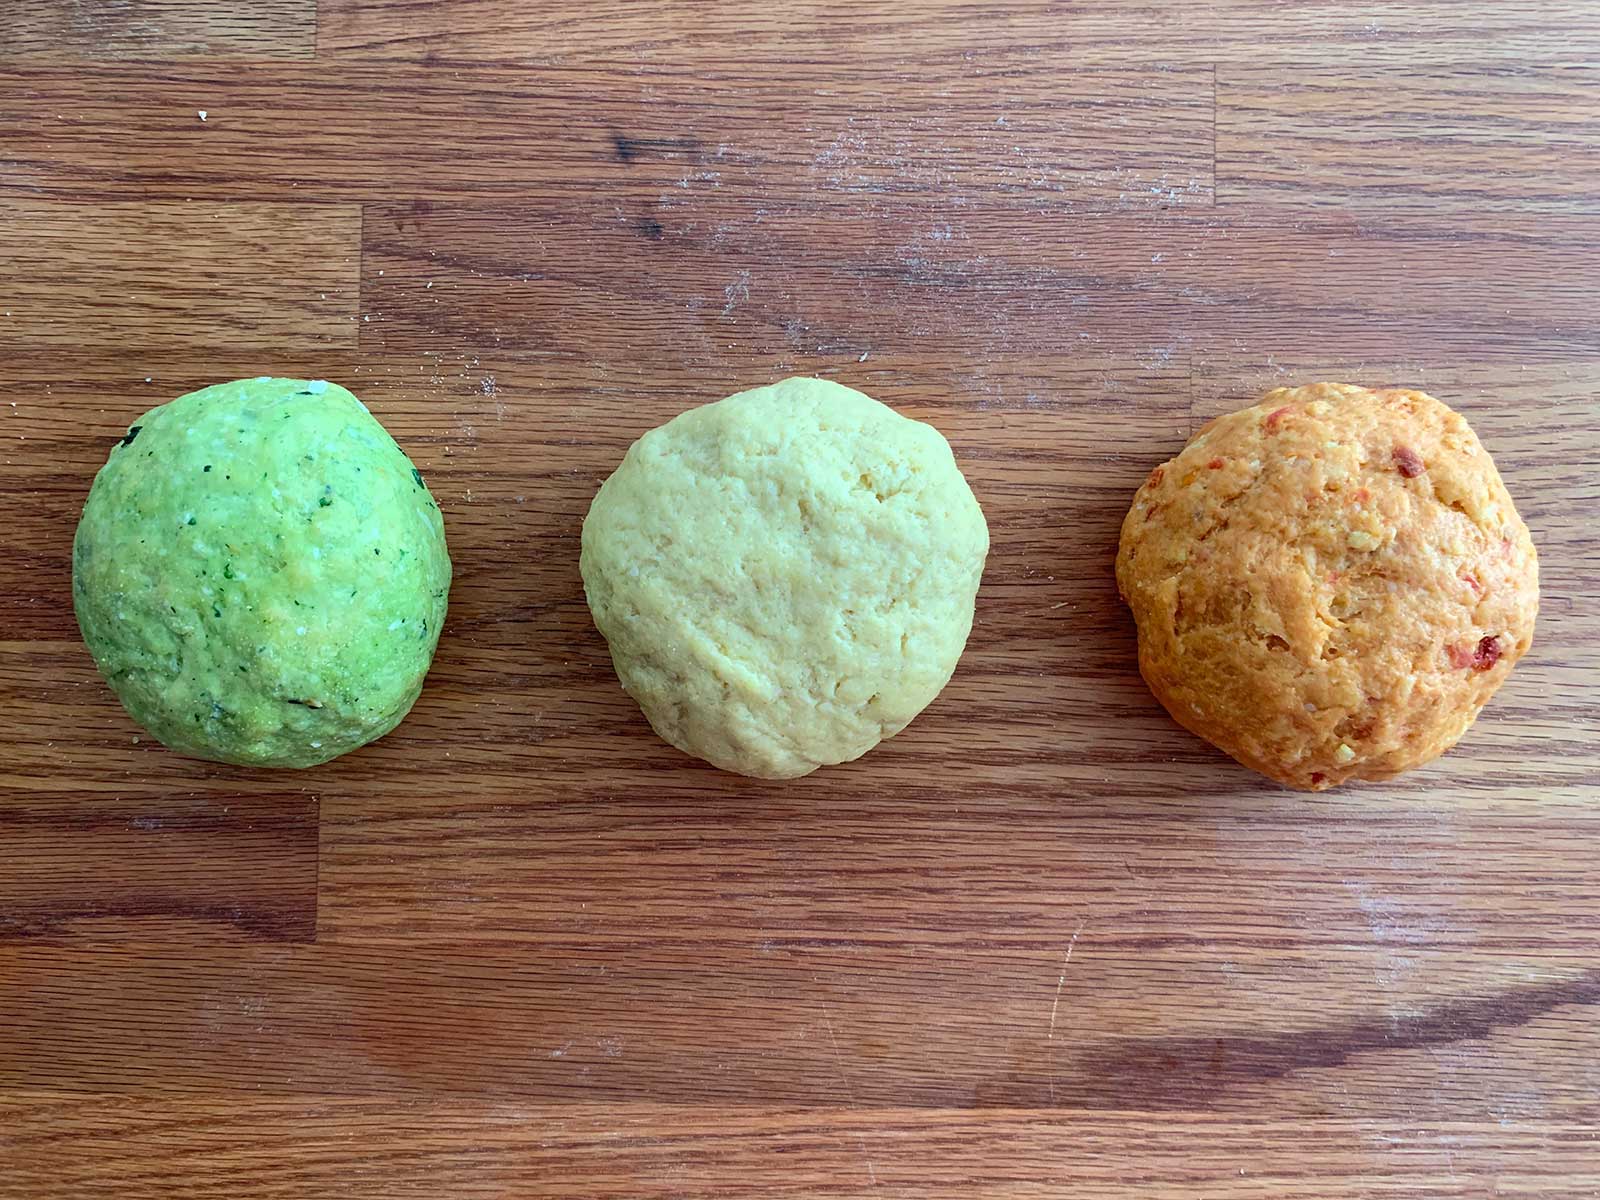 Three different doughs in green, plain, and orange